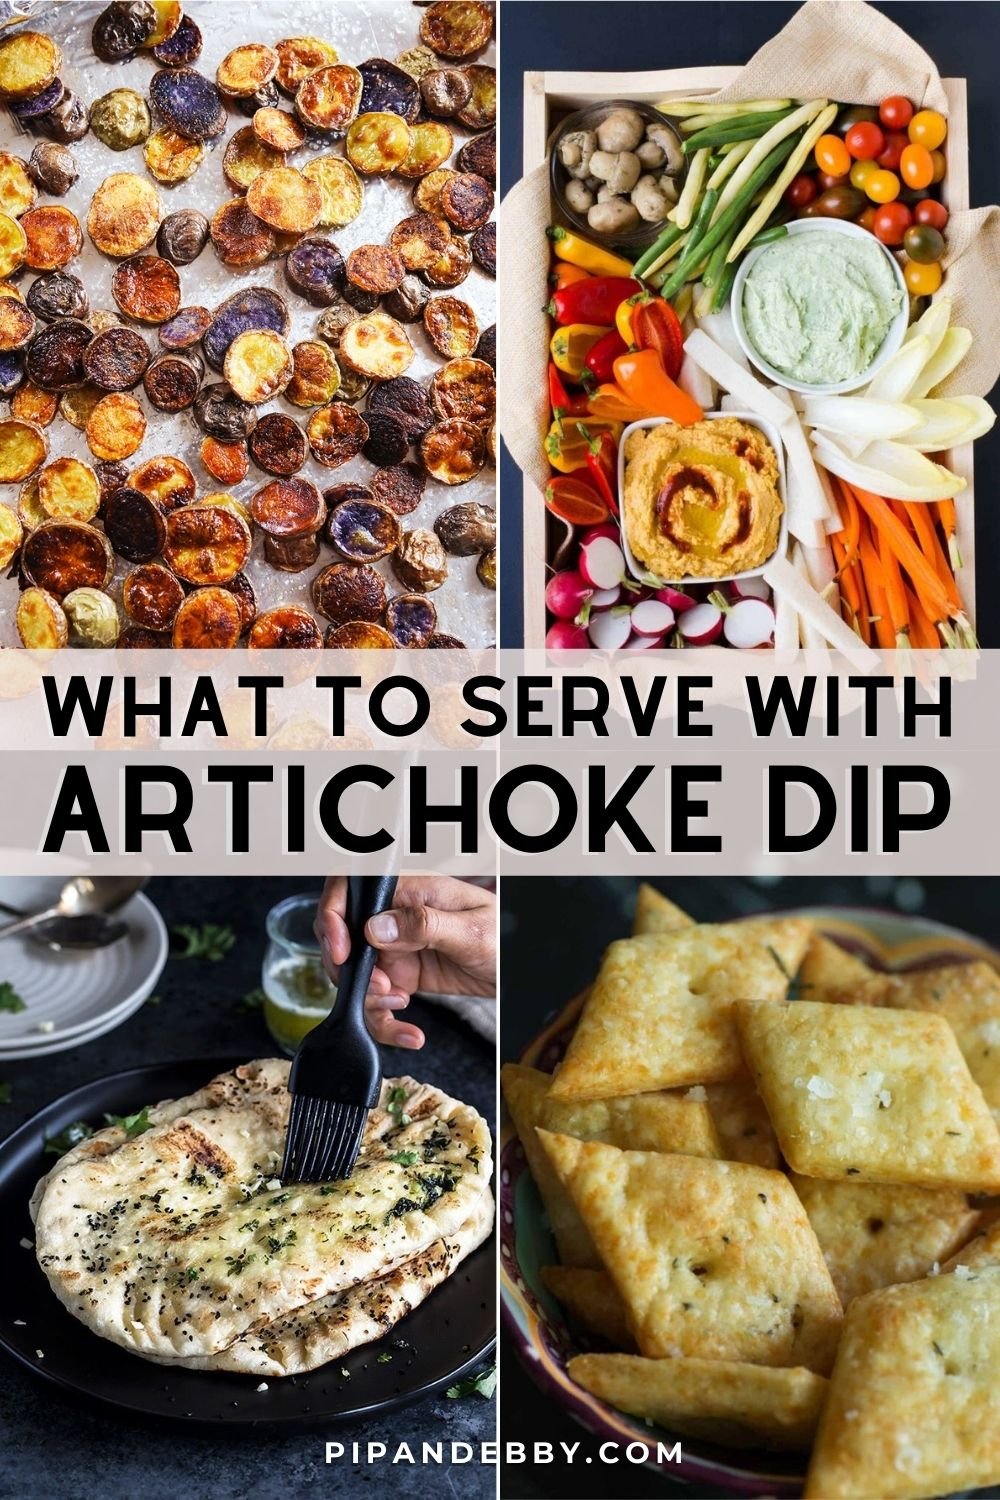 Four food photos with text overlay reading, "What to serve with artichoke dip."